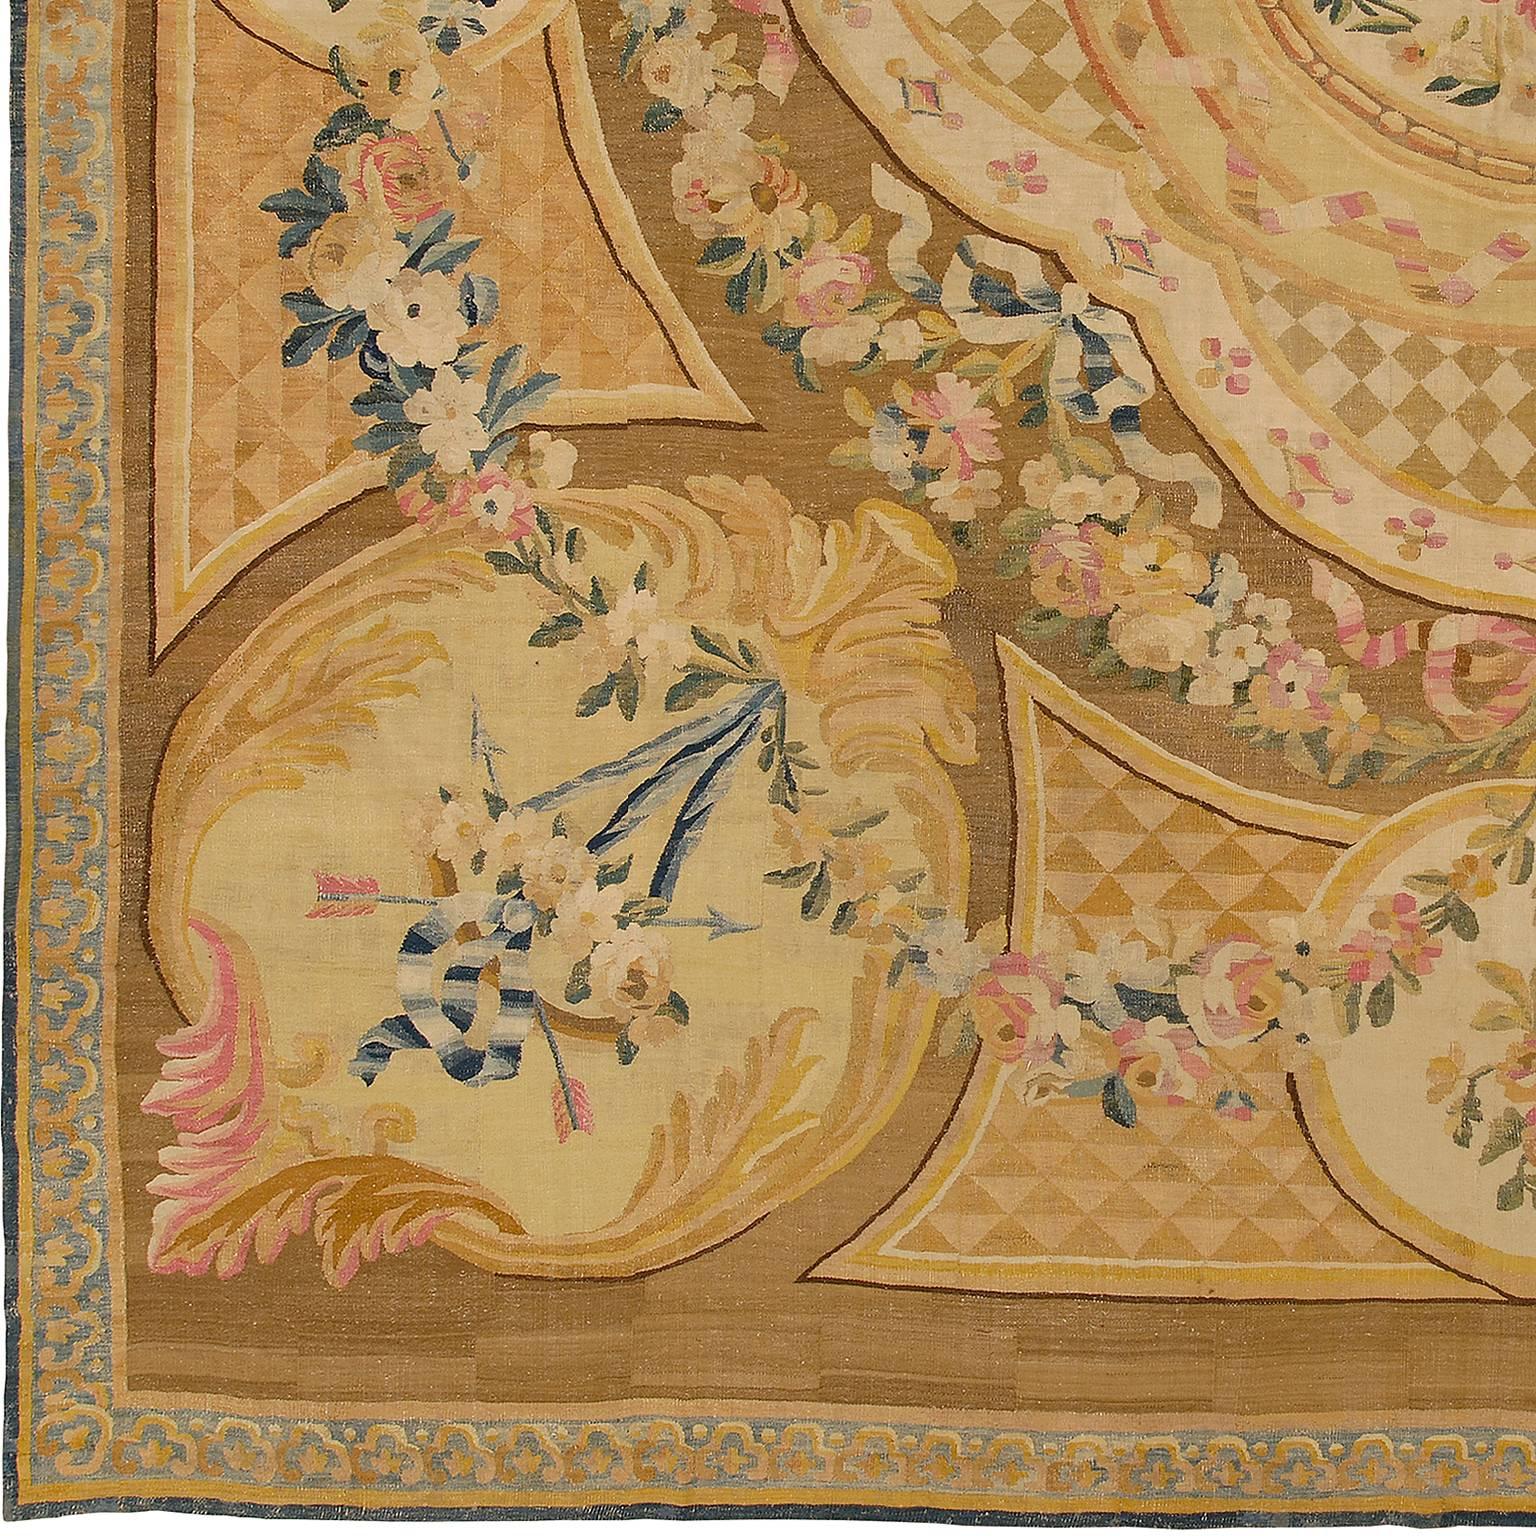 French Aubusson rug, 1760
France, circa 1760
Commissioned by Louis XV.